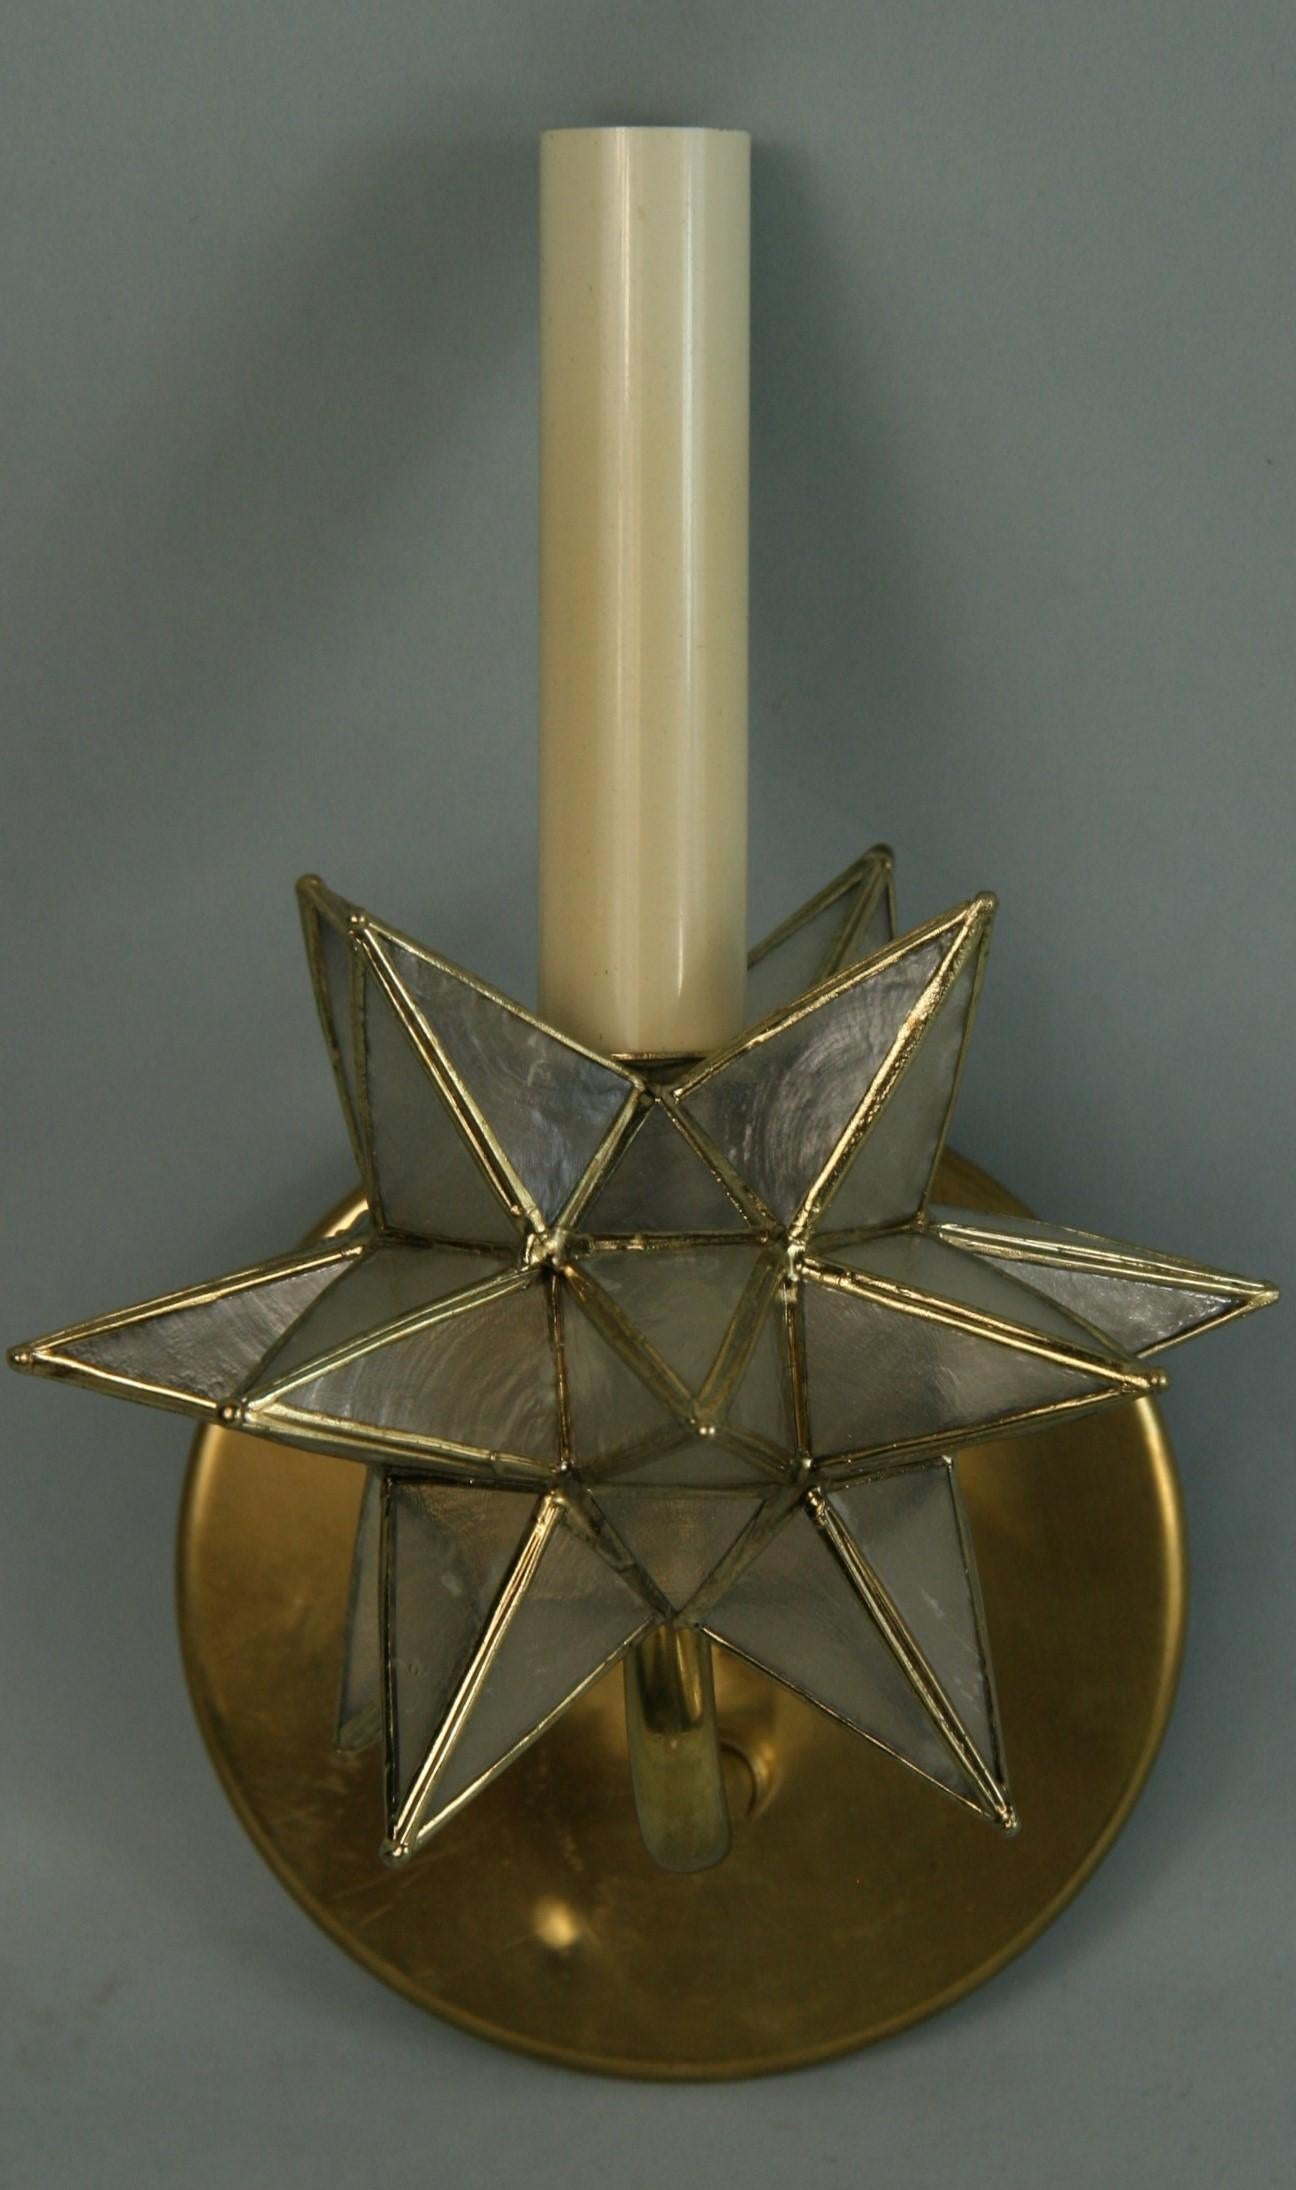 Pair midcentury star capiz shell sconces
Takes one 60 watt max candelabra based bulb
Rewired.
2 pair available